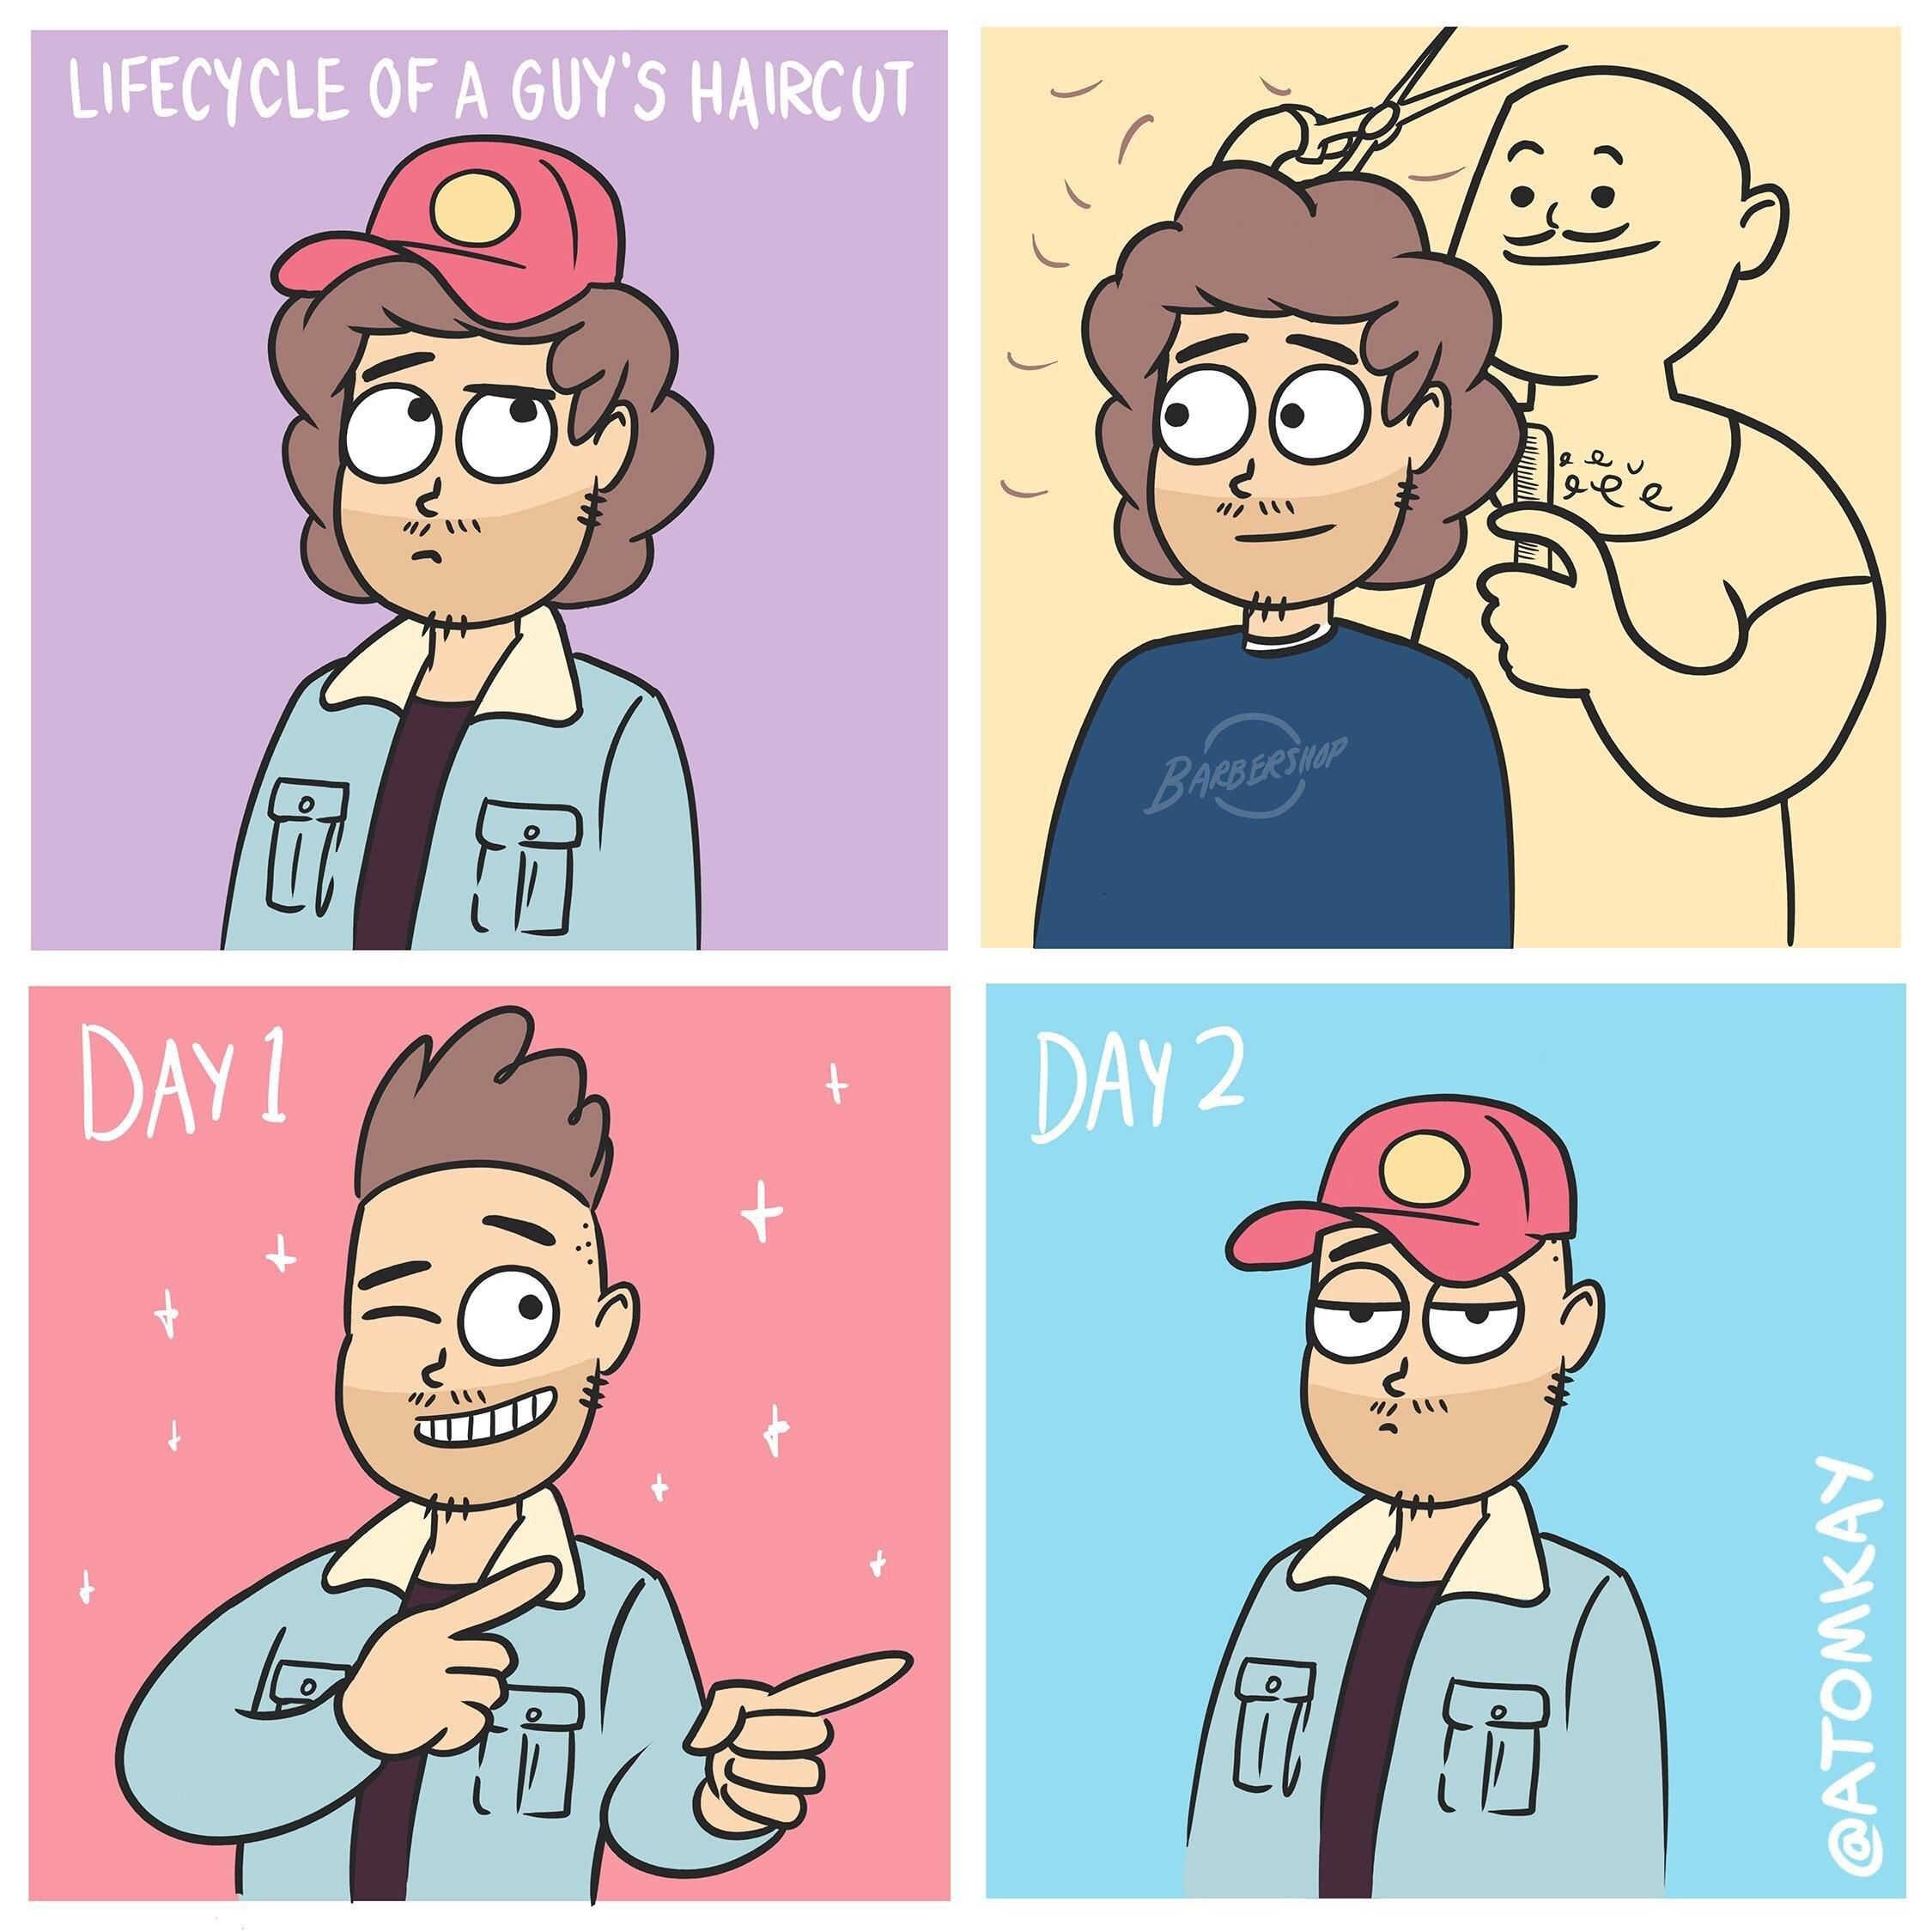 Lifecycle of a Guy’s Haircut